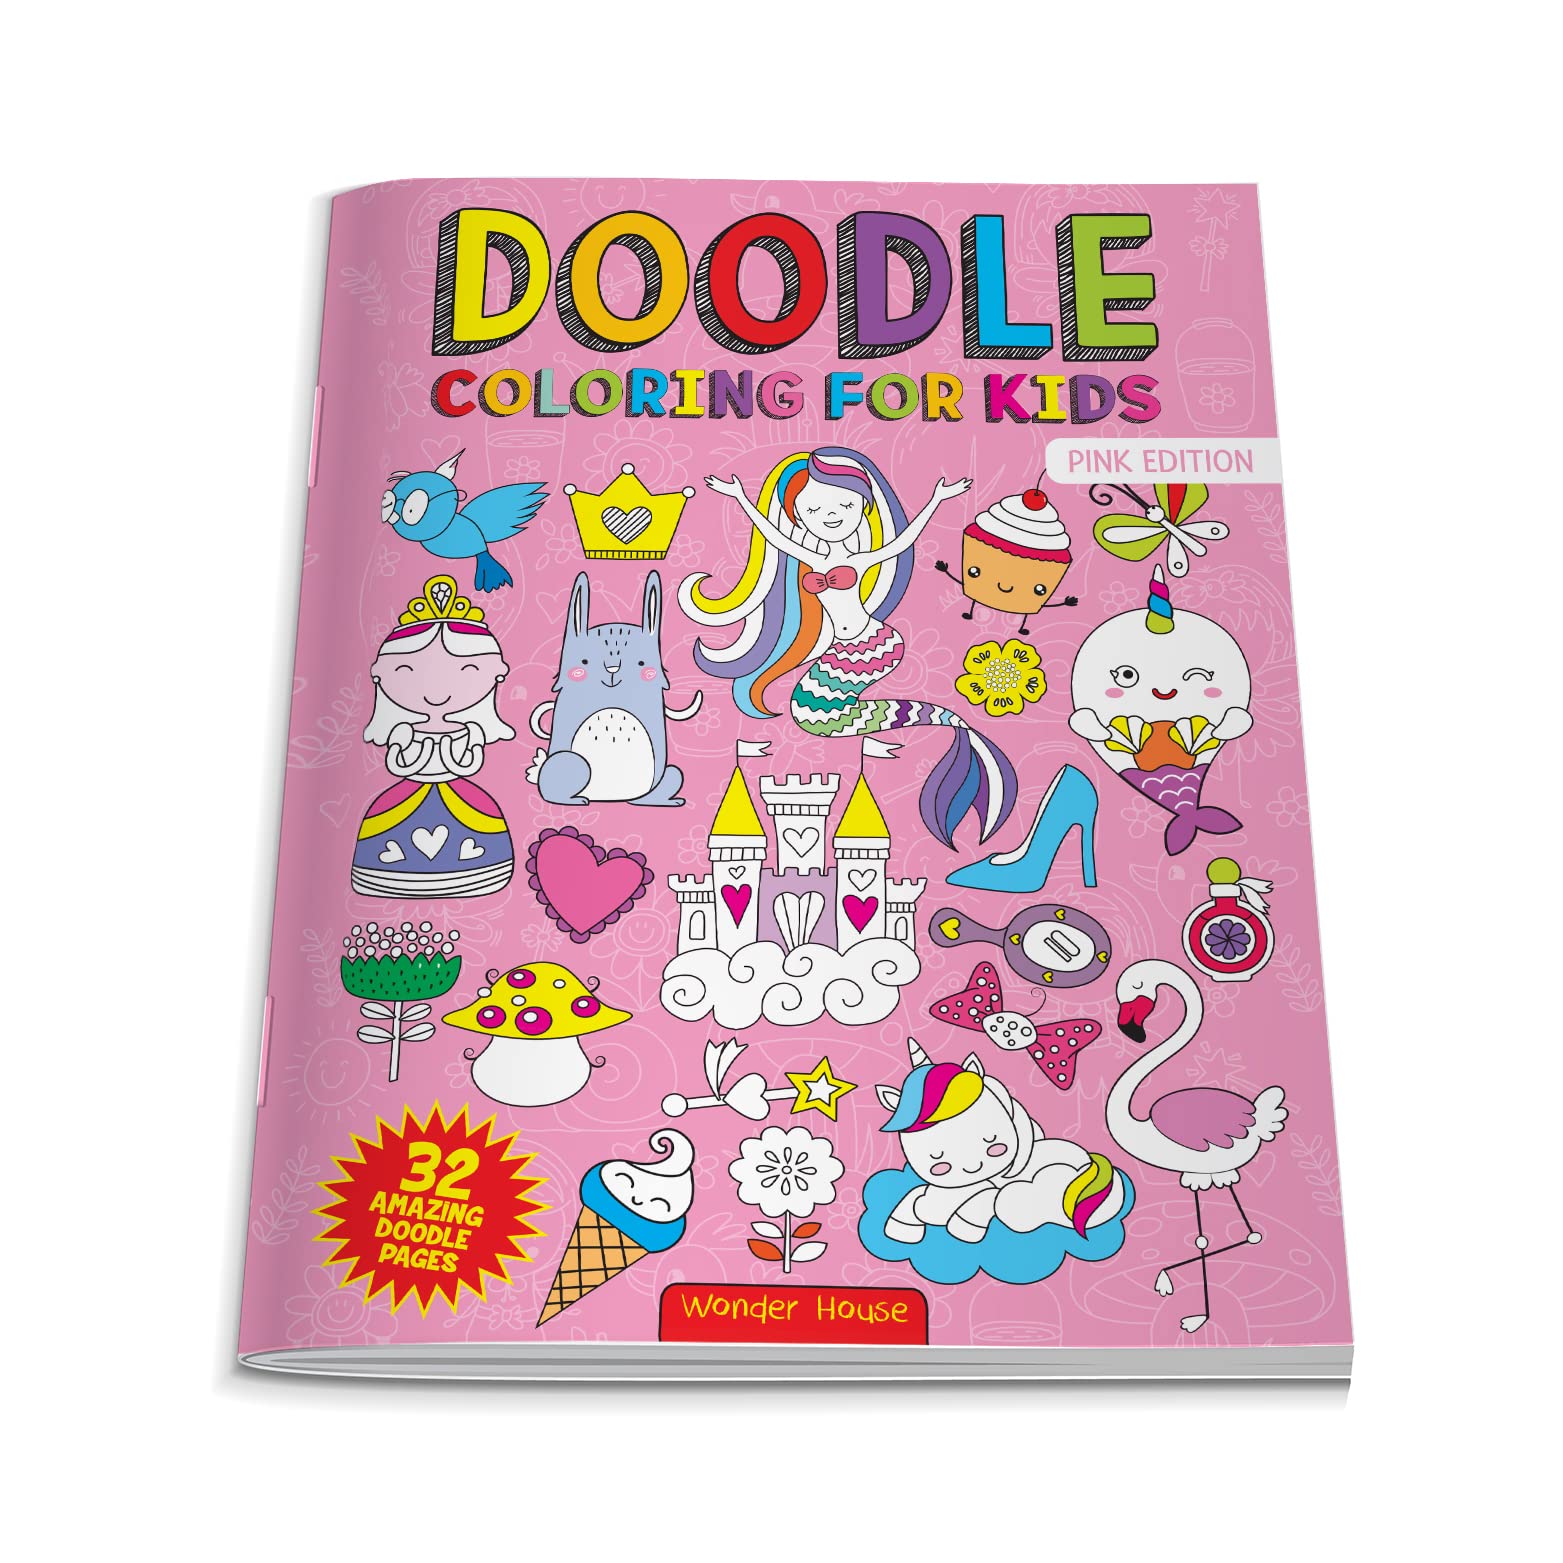 Doodle Colouring For Kids